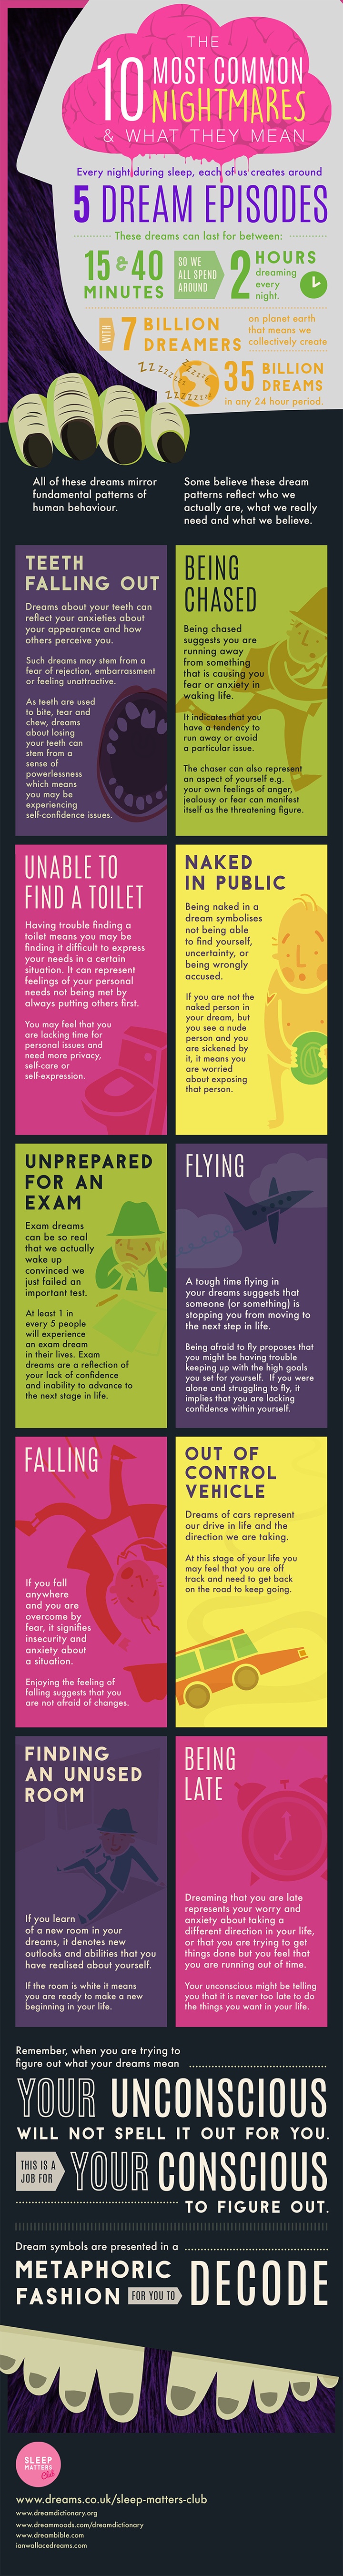 What are signs of bad dreams?